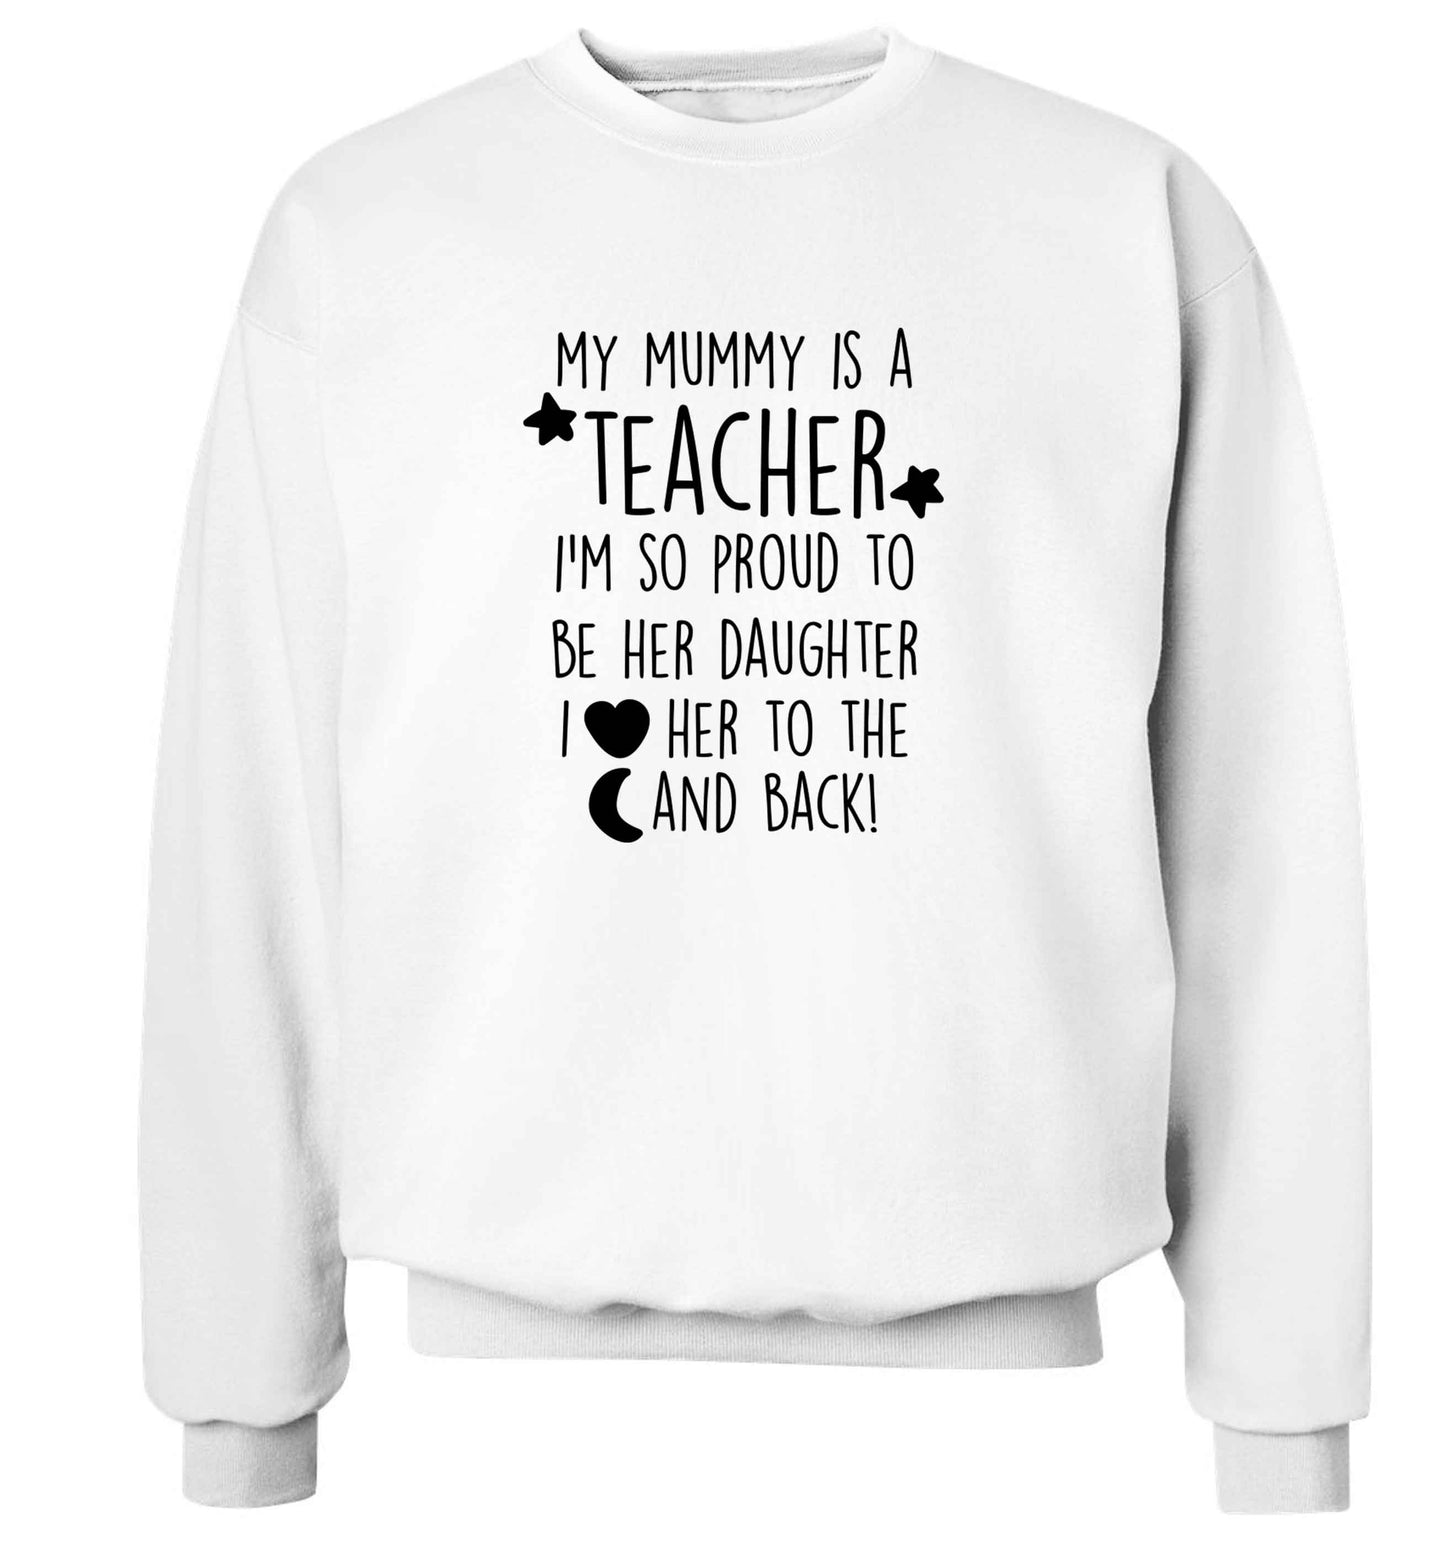 My mummy is a teacher I'm so proud to be her daughter I love her to the moon and back adult's unisex white sweater 2XL